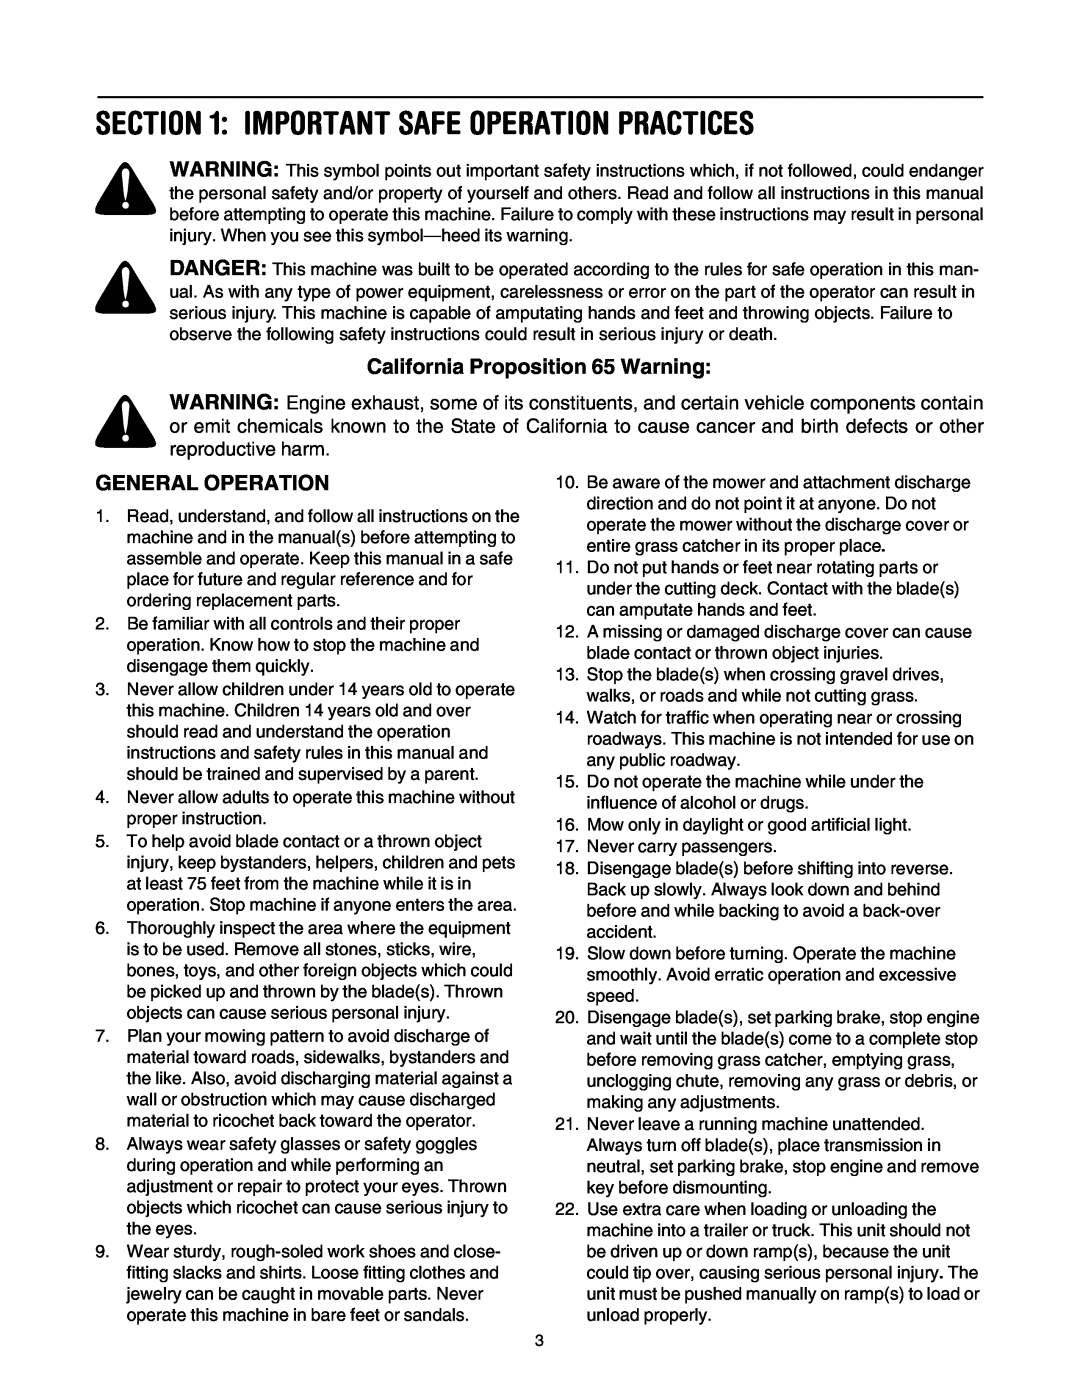 MTD 795, 792, 791, 790 manual Important Safe Operation Practices, California Proposition 65 Warning, General Operation 